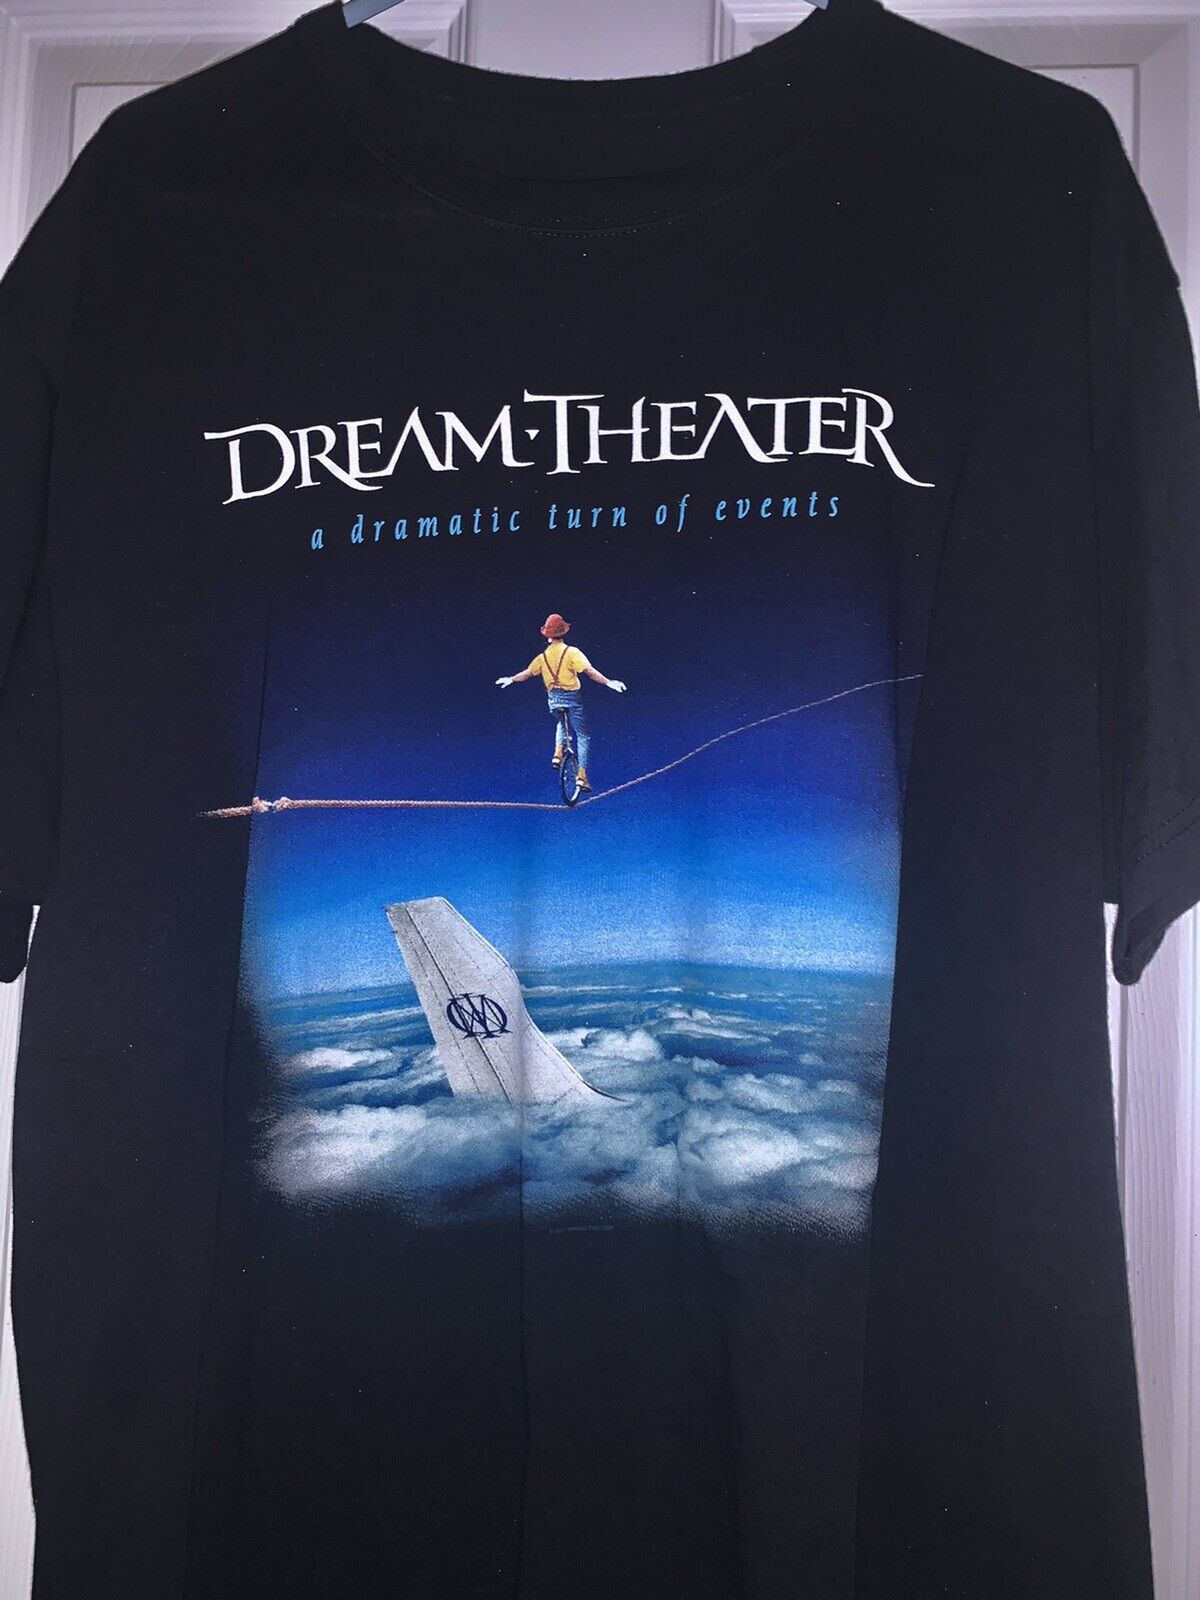 Dream Theater A Dramatic Turn Of Events 2011 tour shirt. size L.